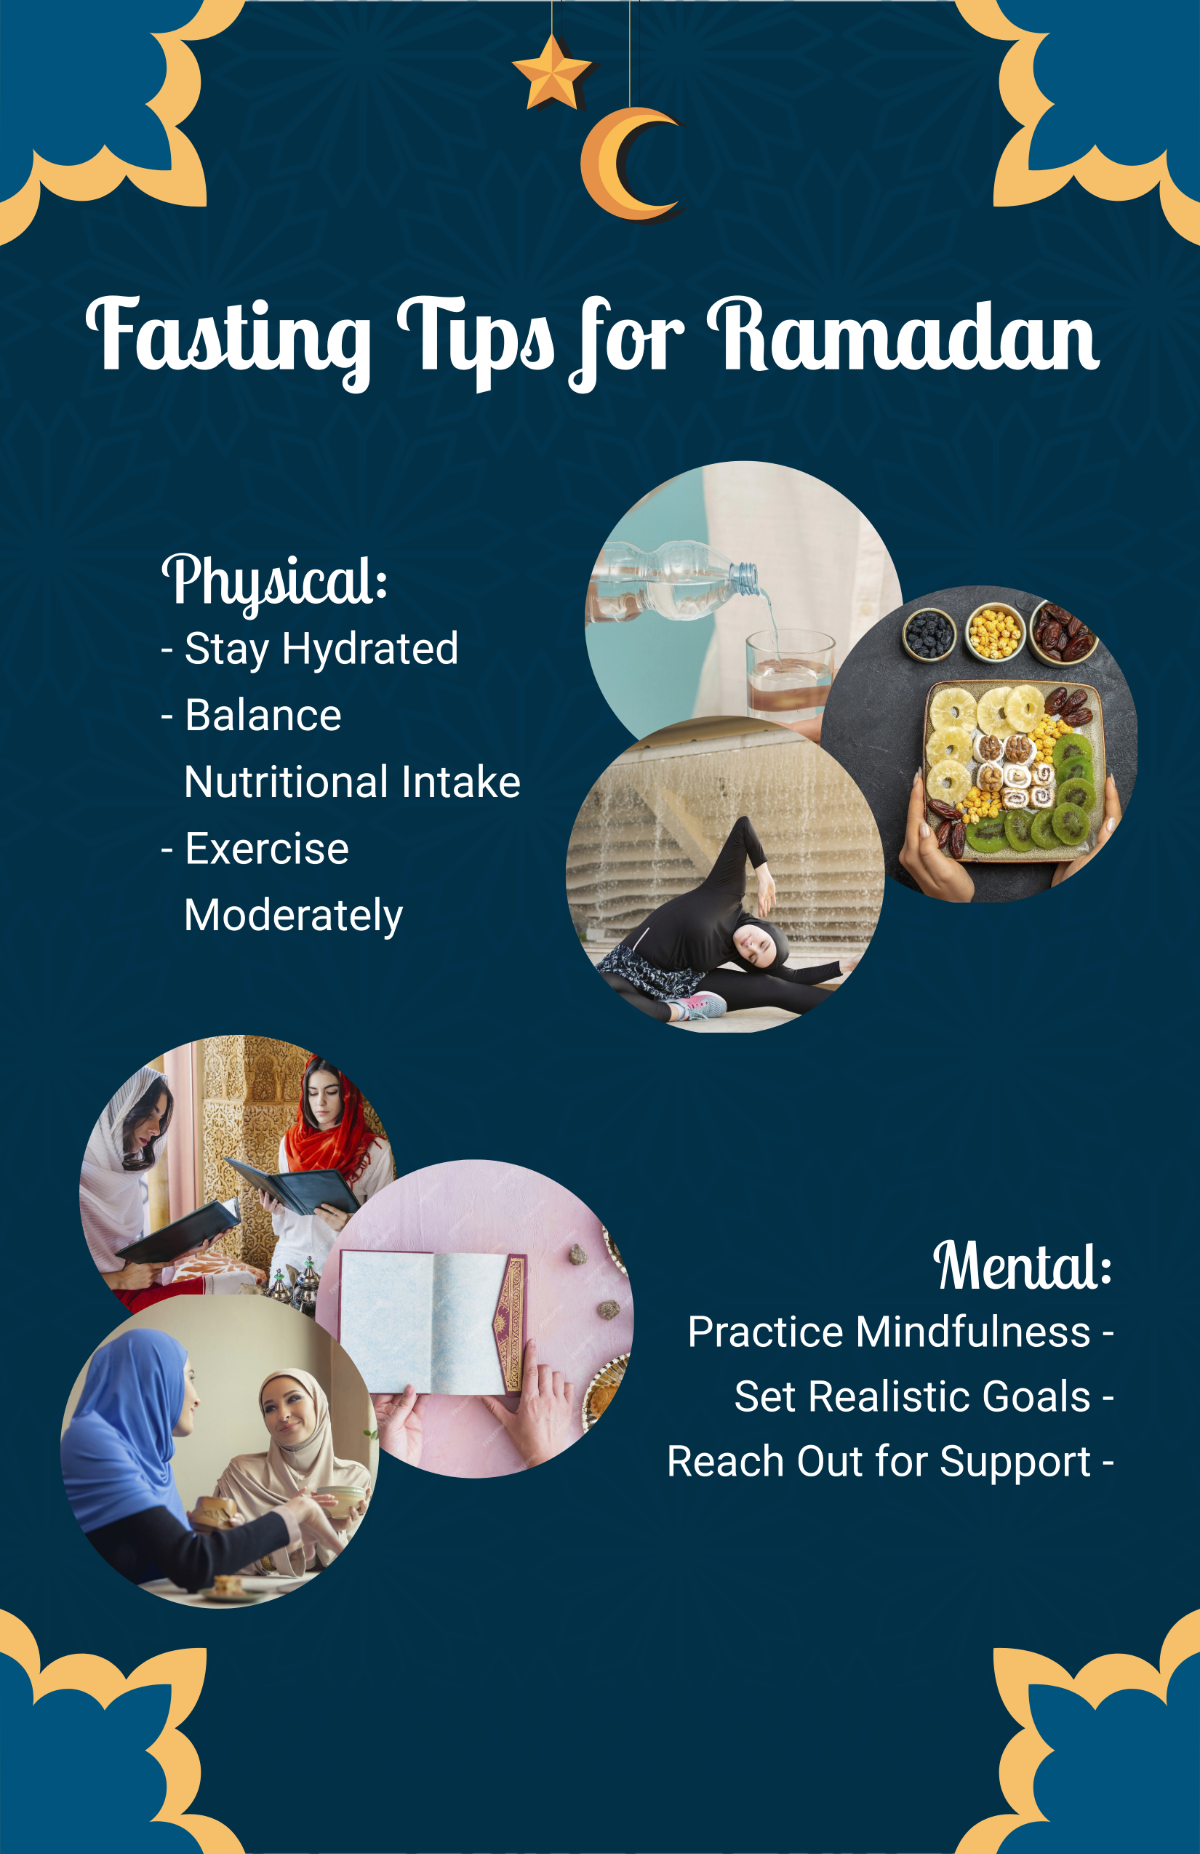 Fasting Tips for Ramadan Display Poster Template